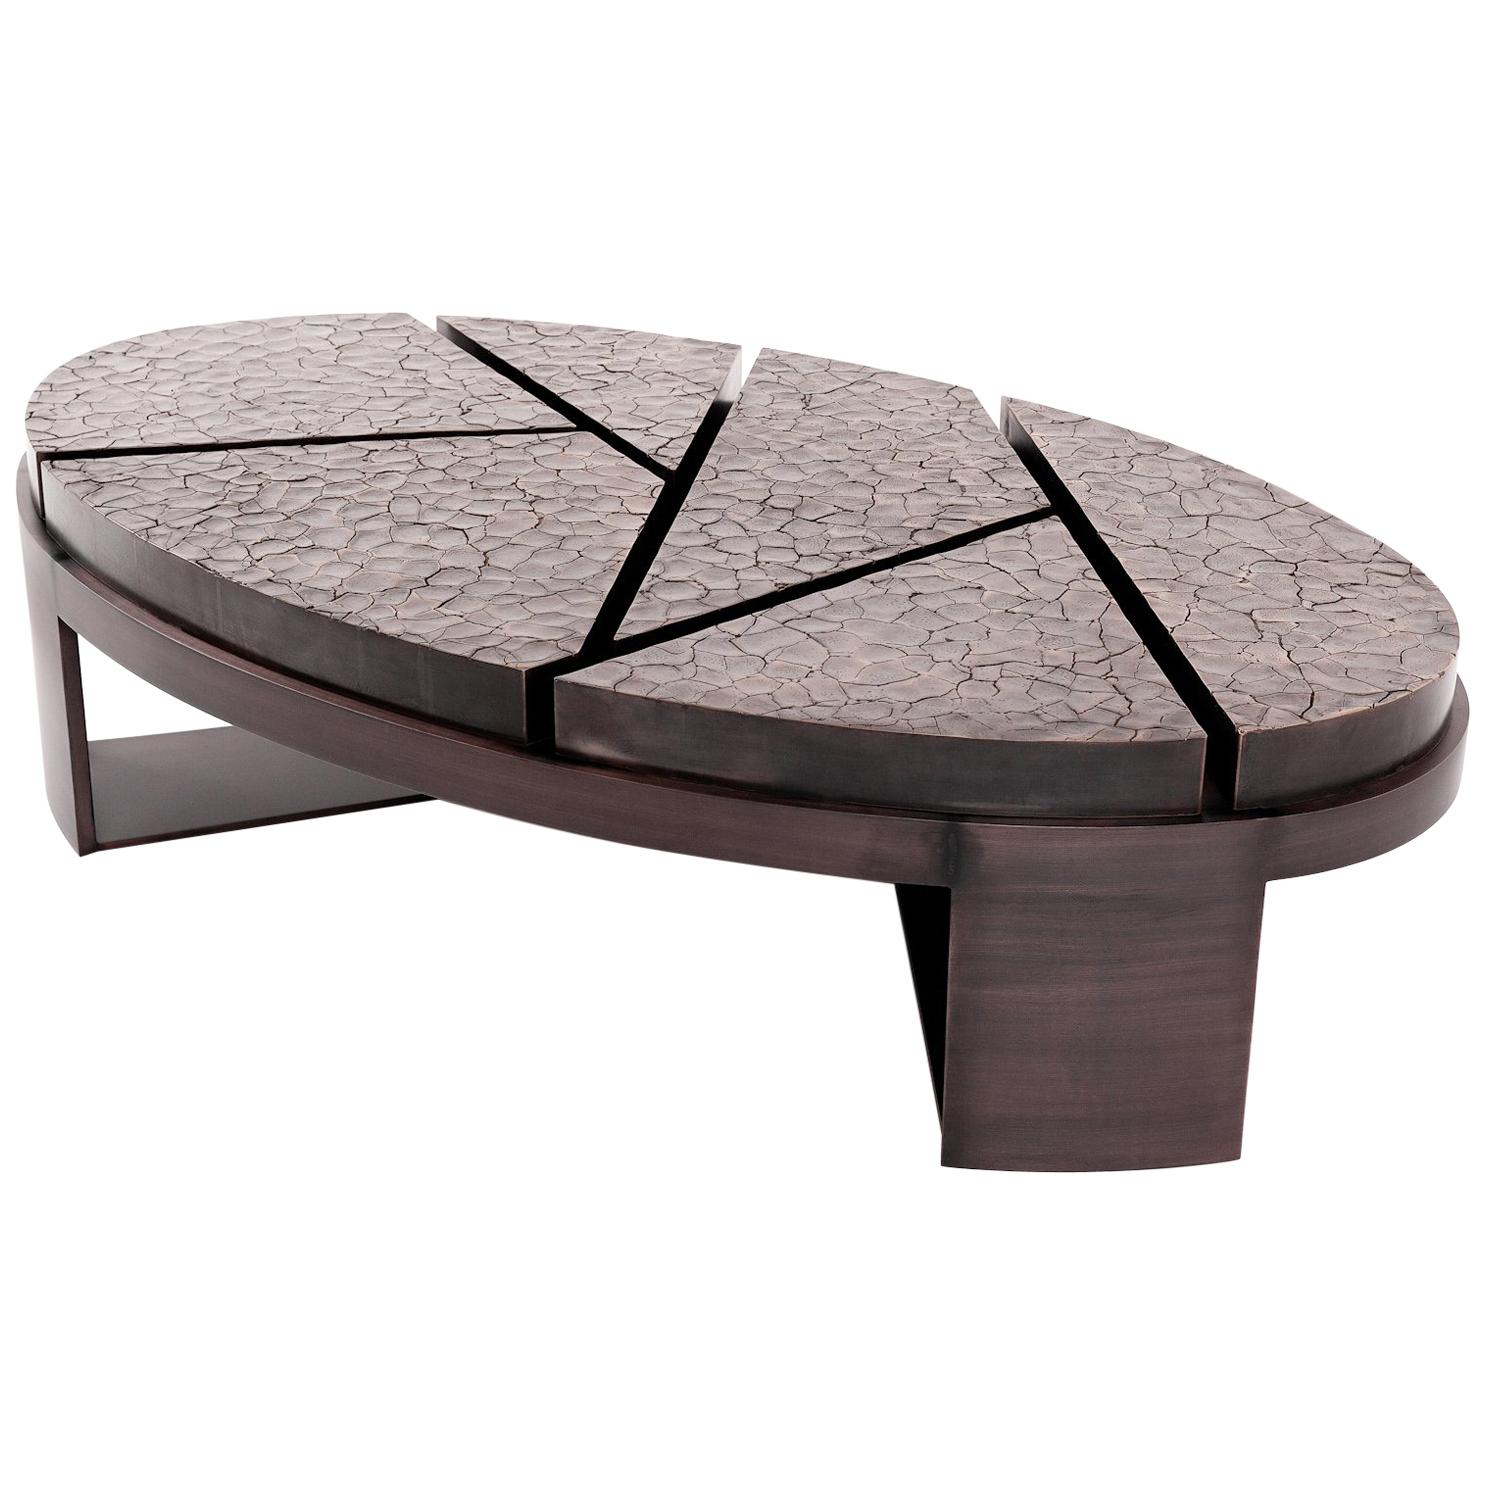 Aurora Coffee Table - Cracked Earth - Size II For Sale